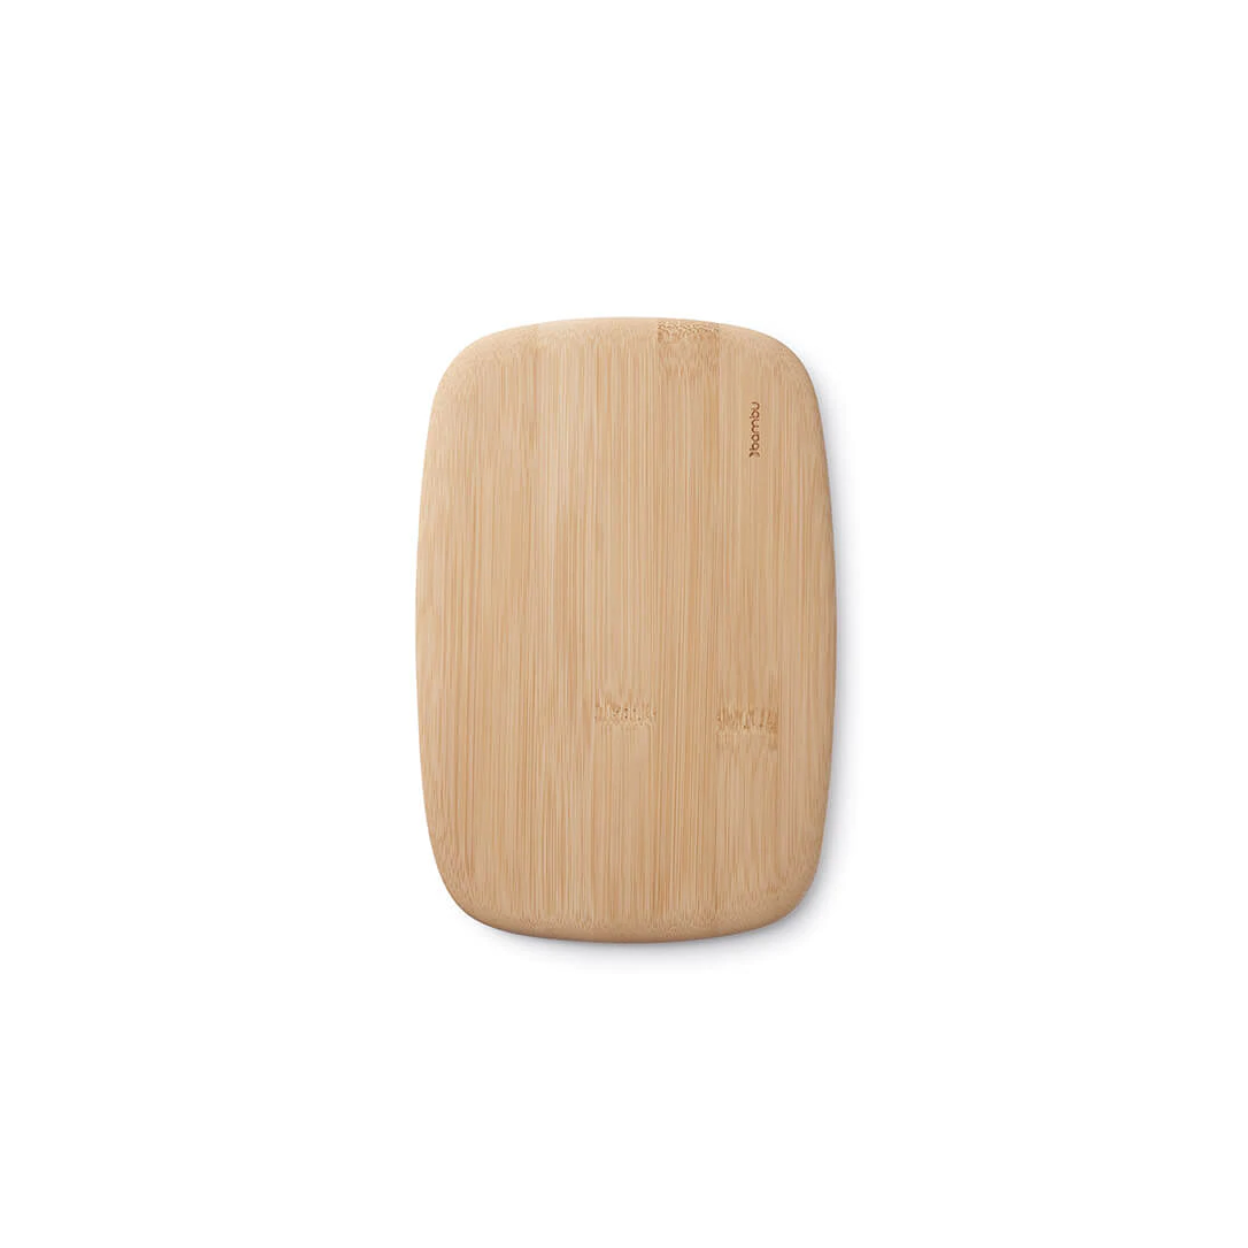 https://cdn.shopify.com/s/files/1/0610/0602/0823/products/ClassicBambooCuttingBoard1.png?v=1650526150&width=1248